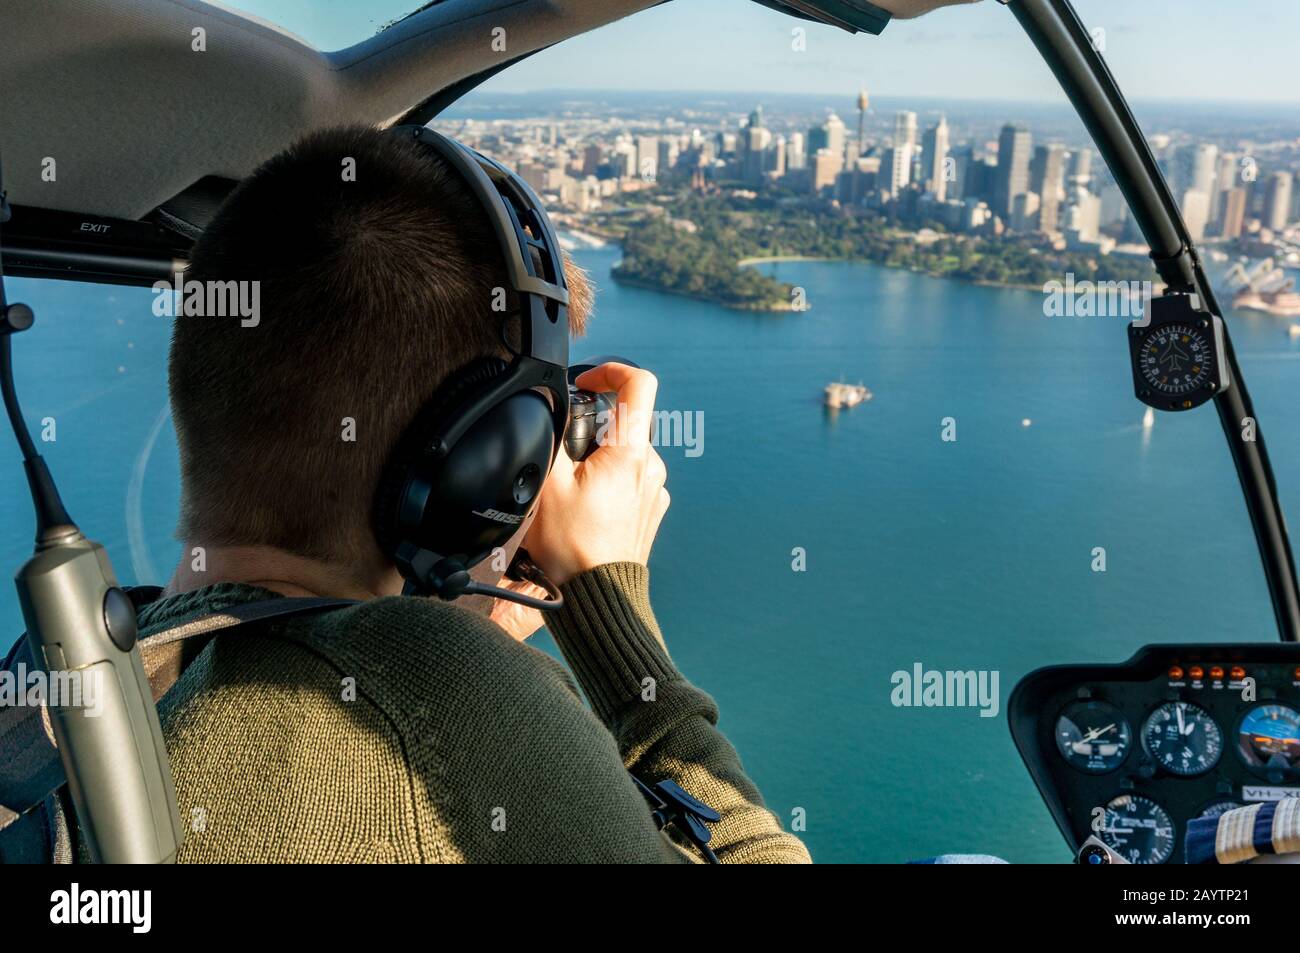 Sydney, Australia - June 18, 2014: Caucasian man taking photos of Sydney CBD and Sydney Harbour from helicopter. Tourist in front seat in helicopter p Stock Photo